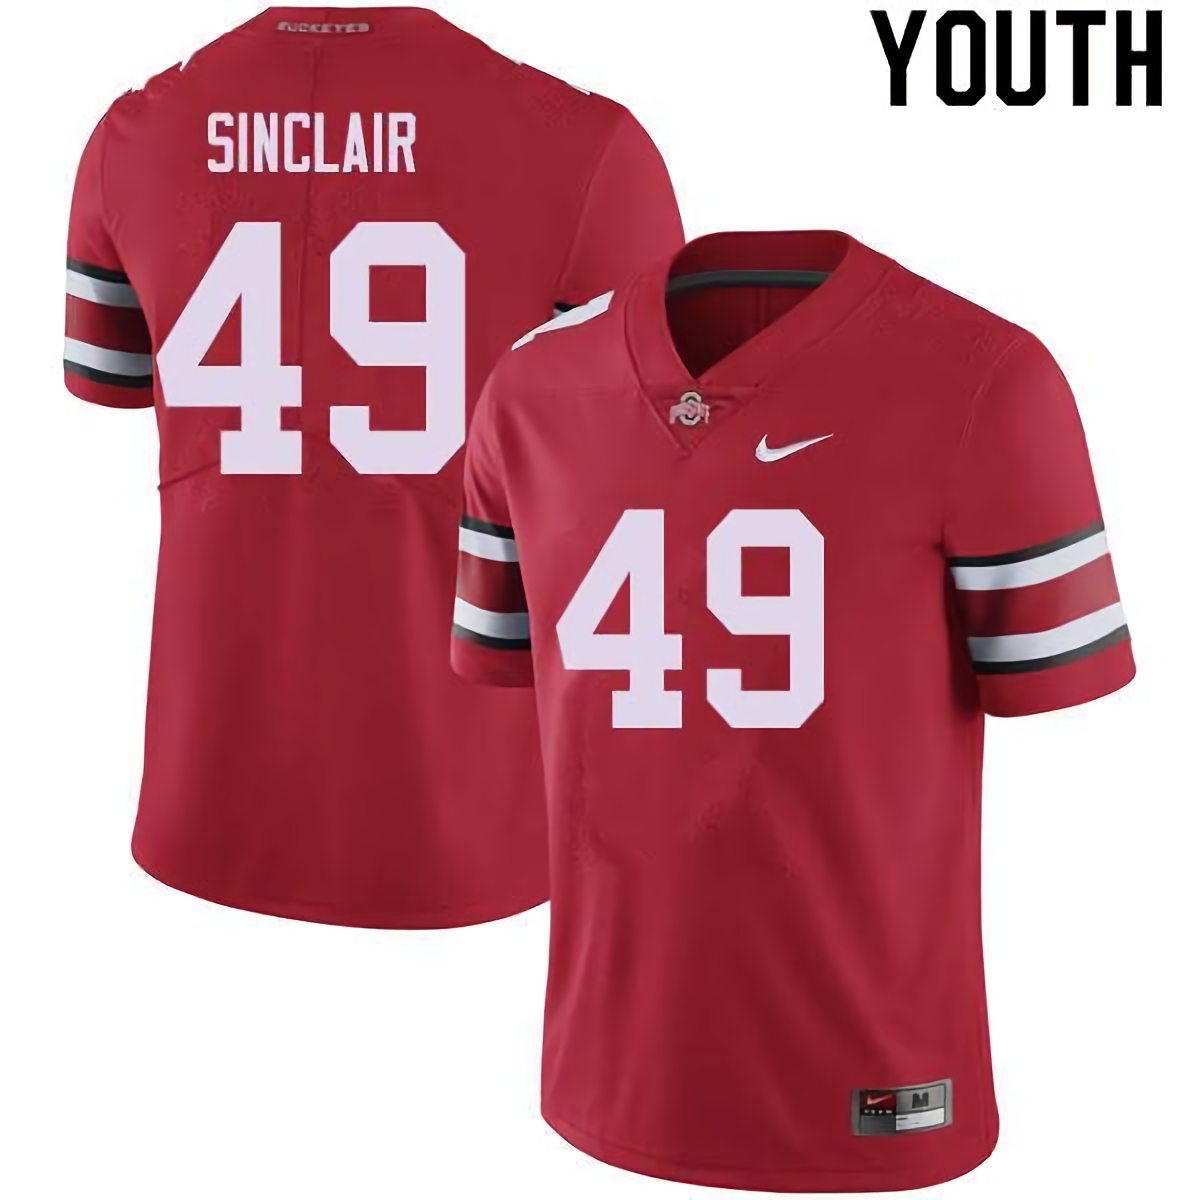 Darryl Sinclair Ohio State Buckeyes Youth NCAA #49 Nike Red College Stitched Football Jersey YCR6756PT